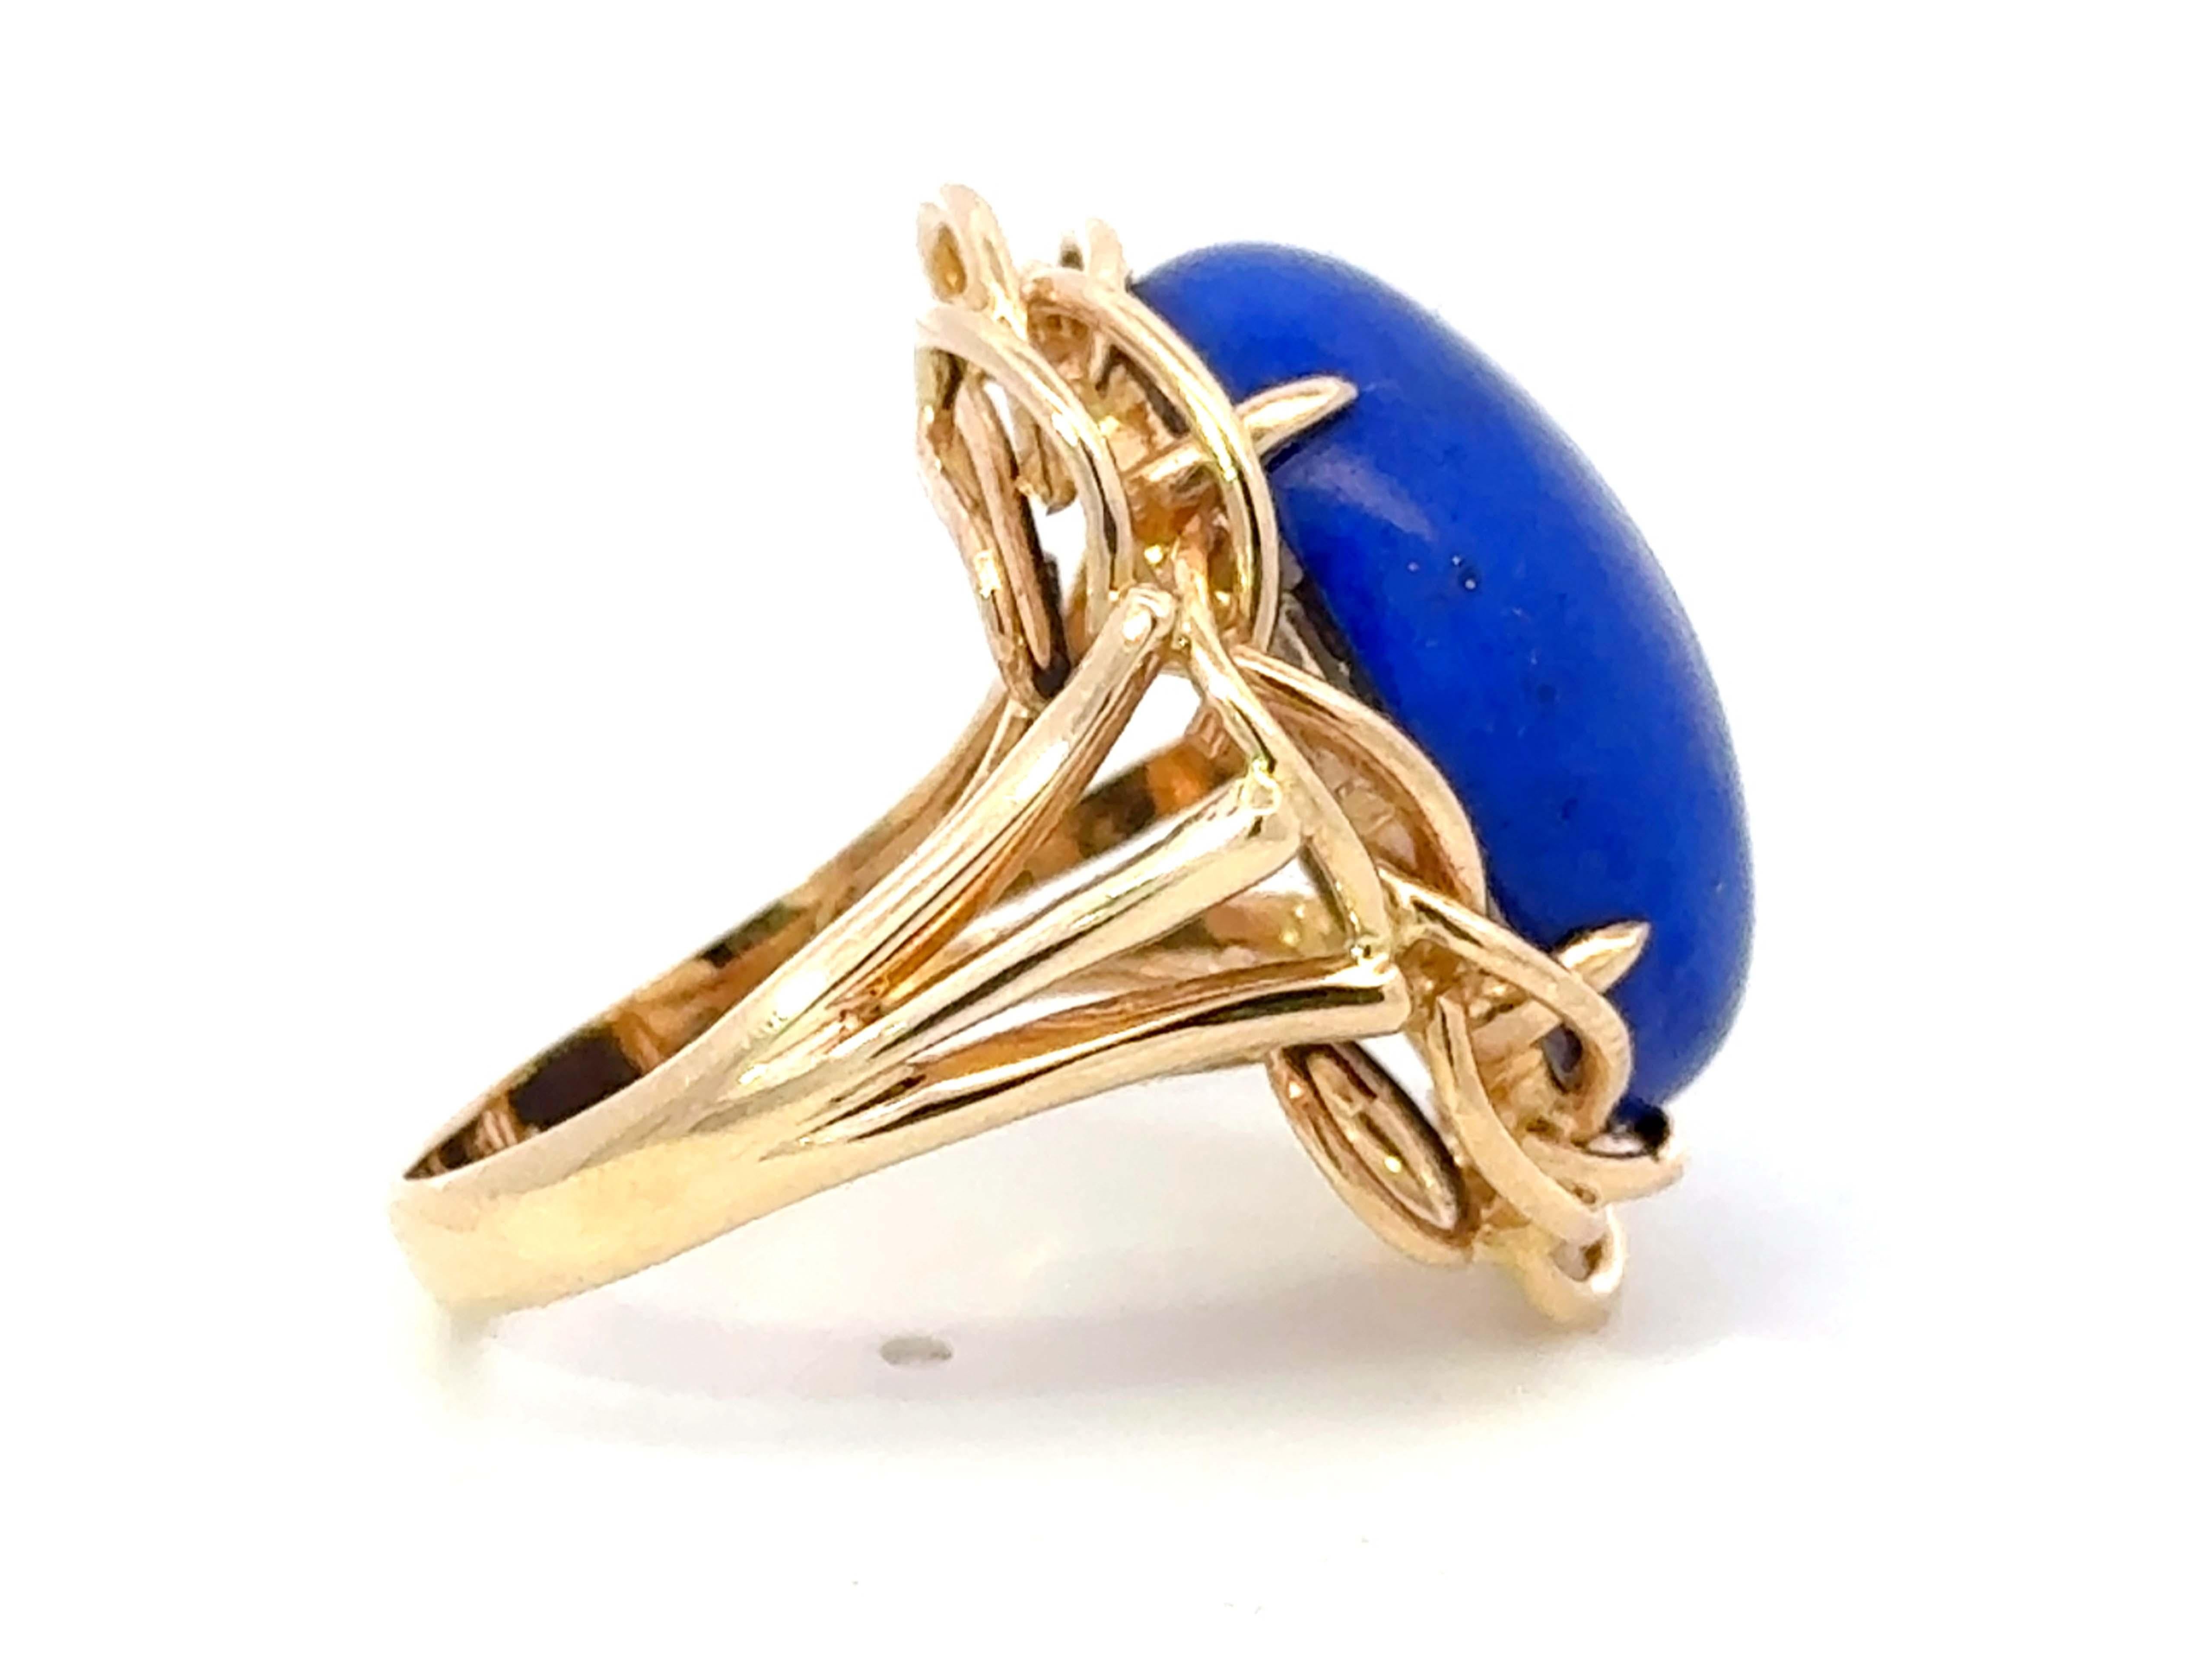 Large Oval Lapis Lazuli Cocktail Ring 14k Yellow Gold In Excellent Condition For Sale In Honolulu, HI